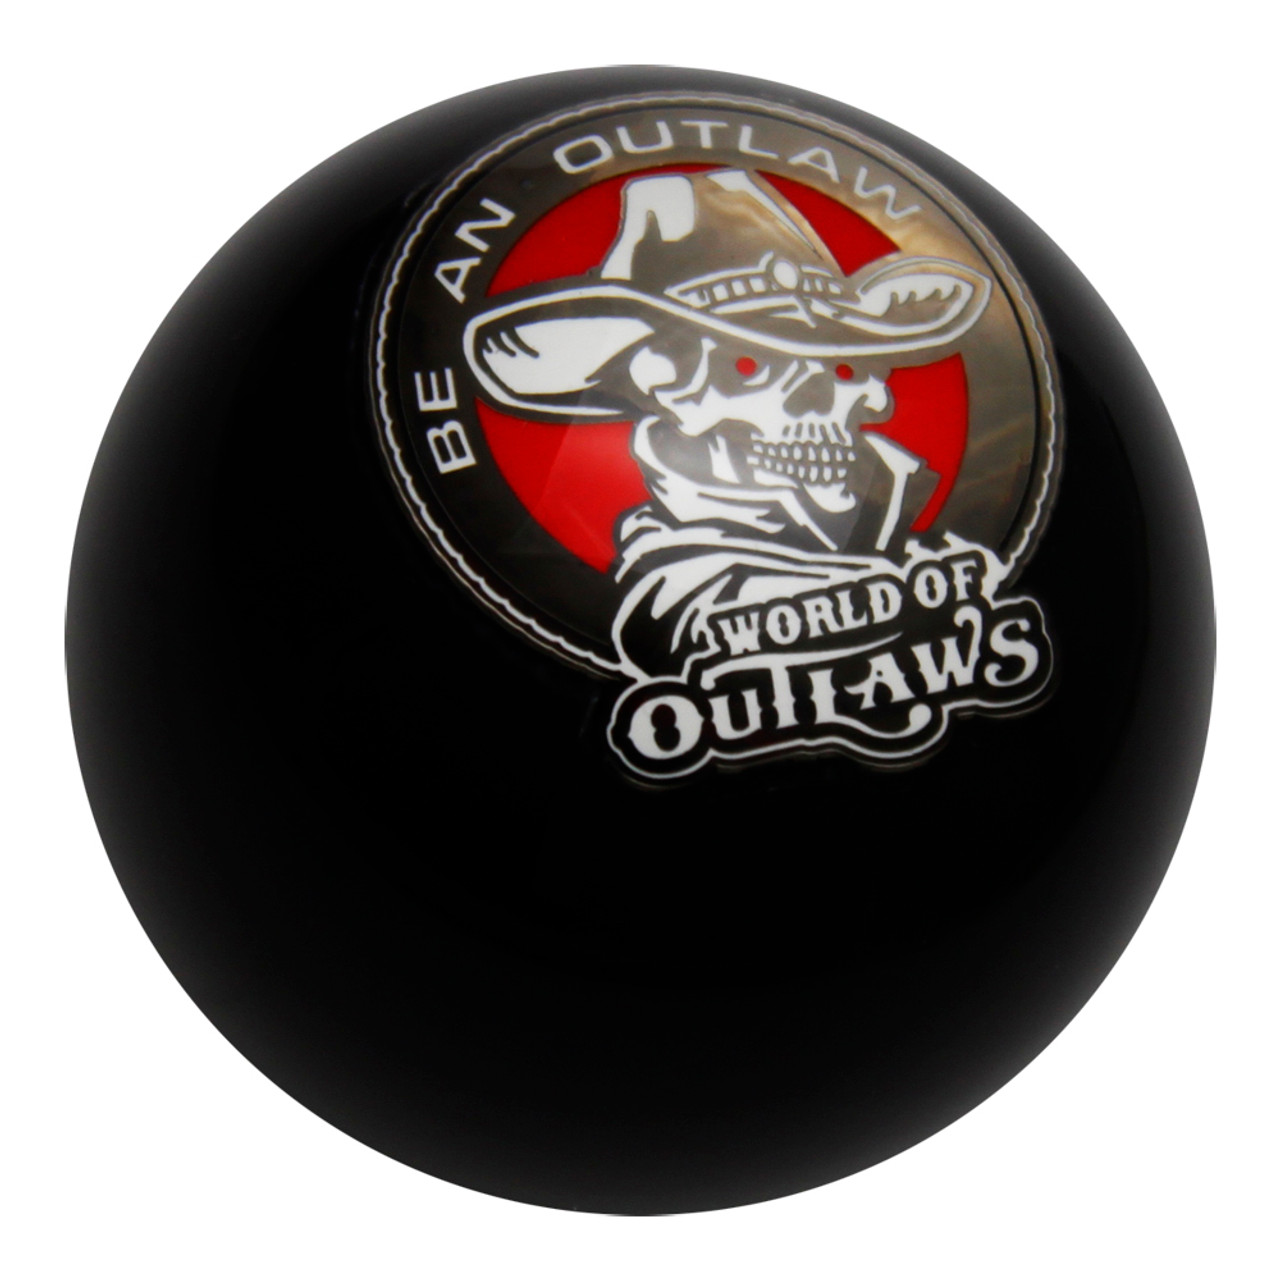 World of Outlaws Be An Outlaw Emblem Shift Knob